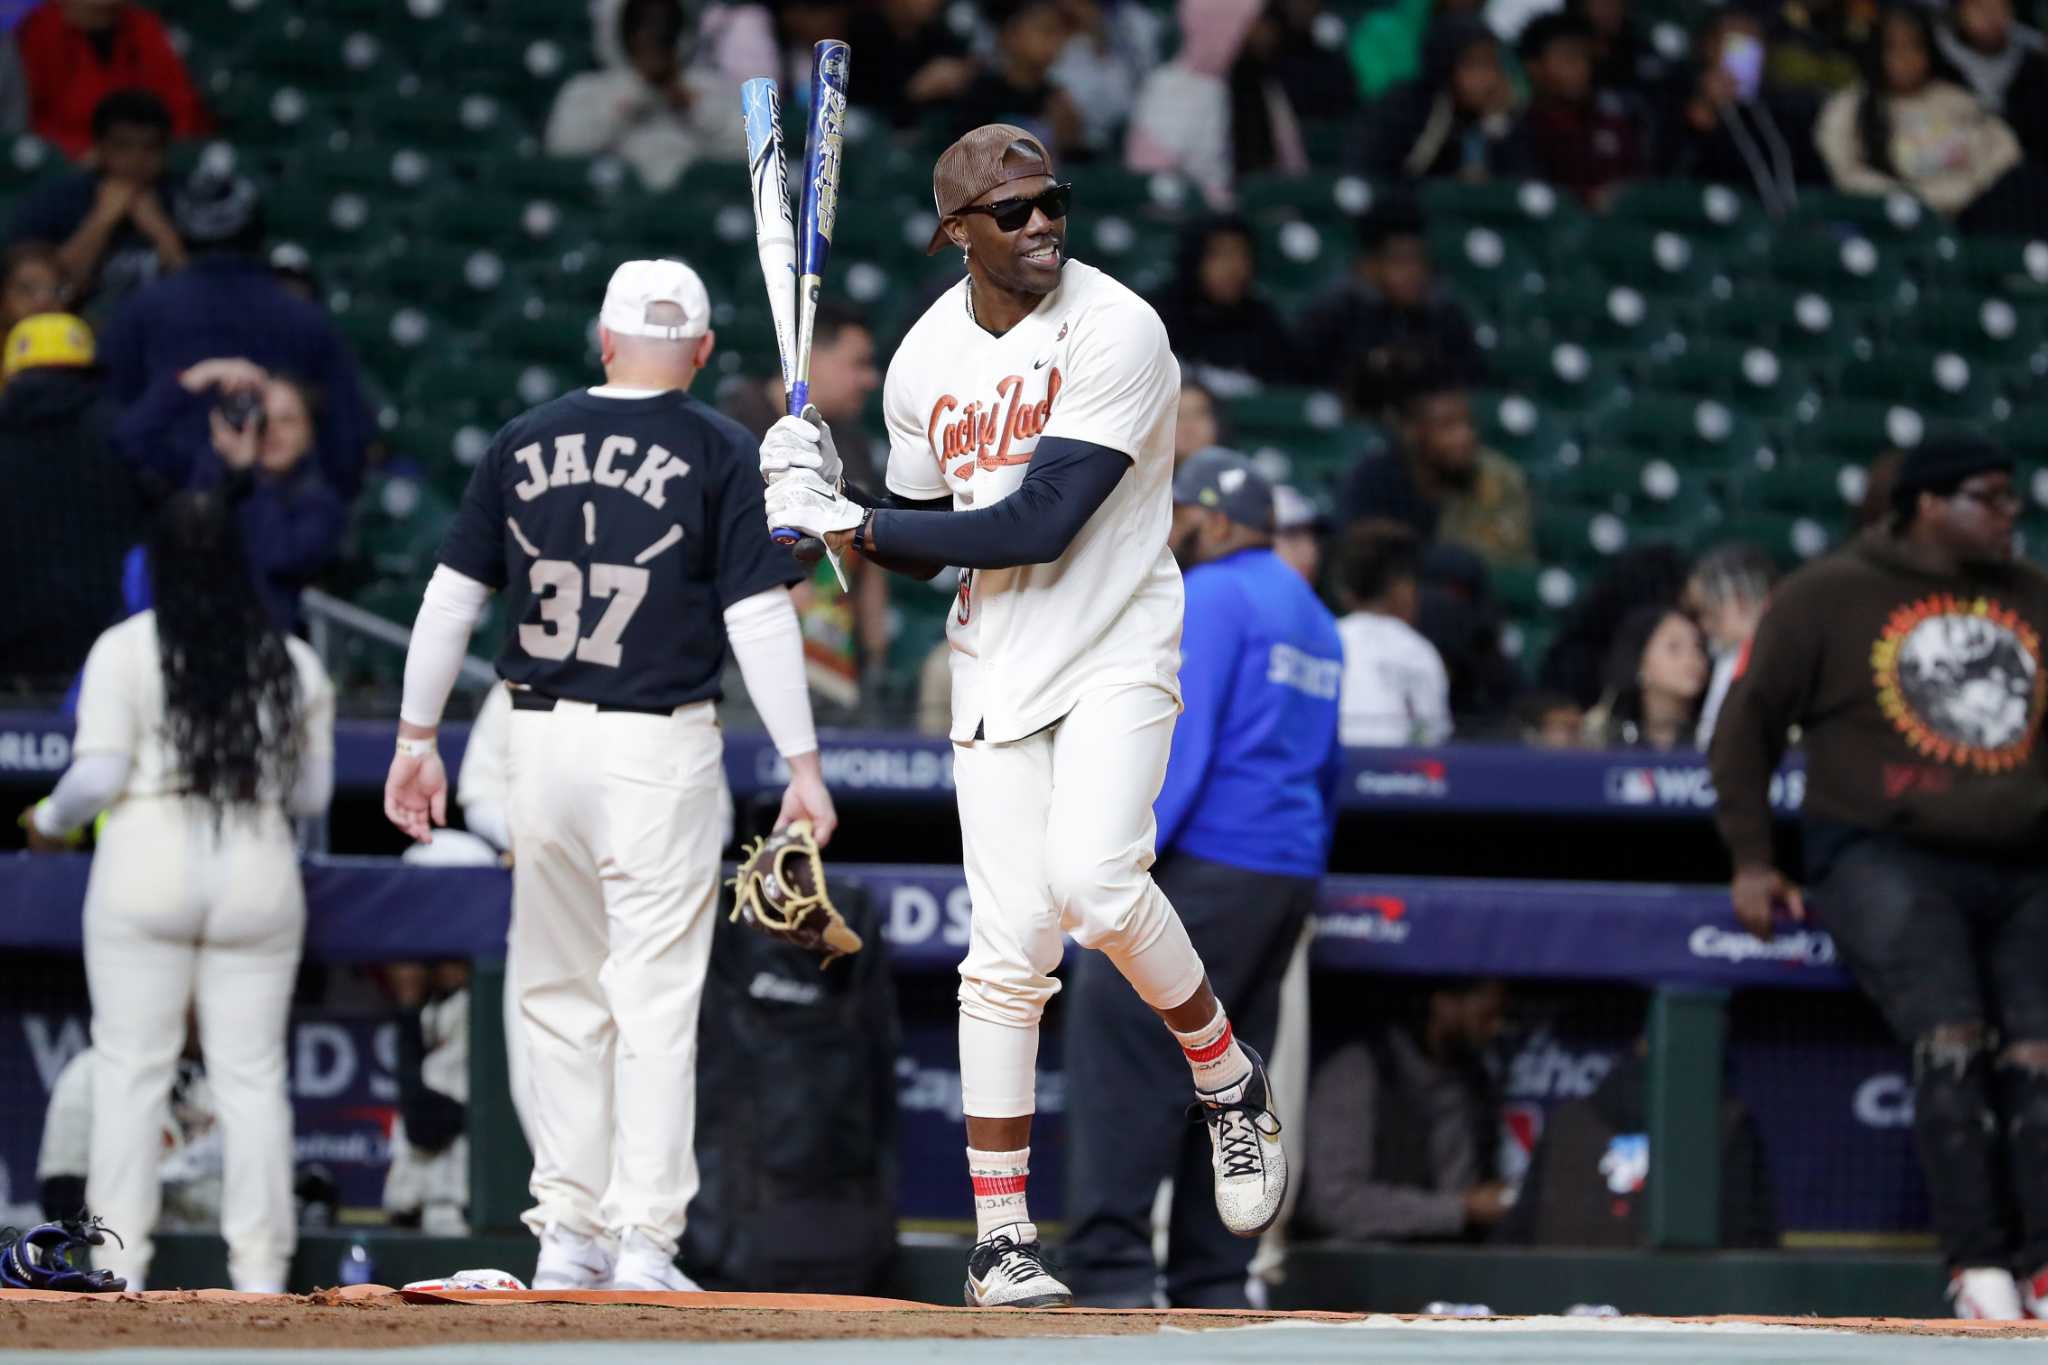 Celebs and athletes join Travis Scott for softball at Minute Maid